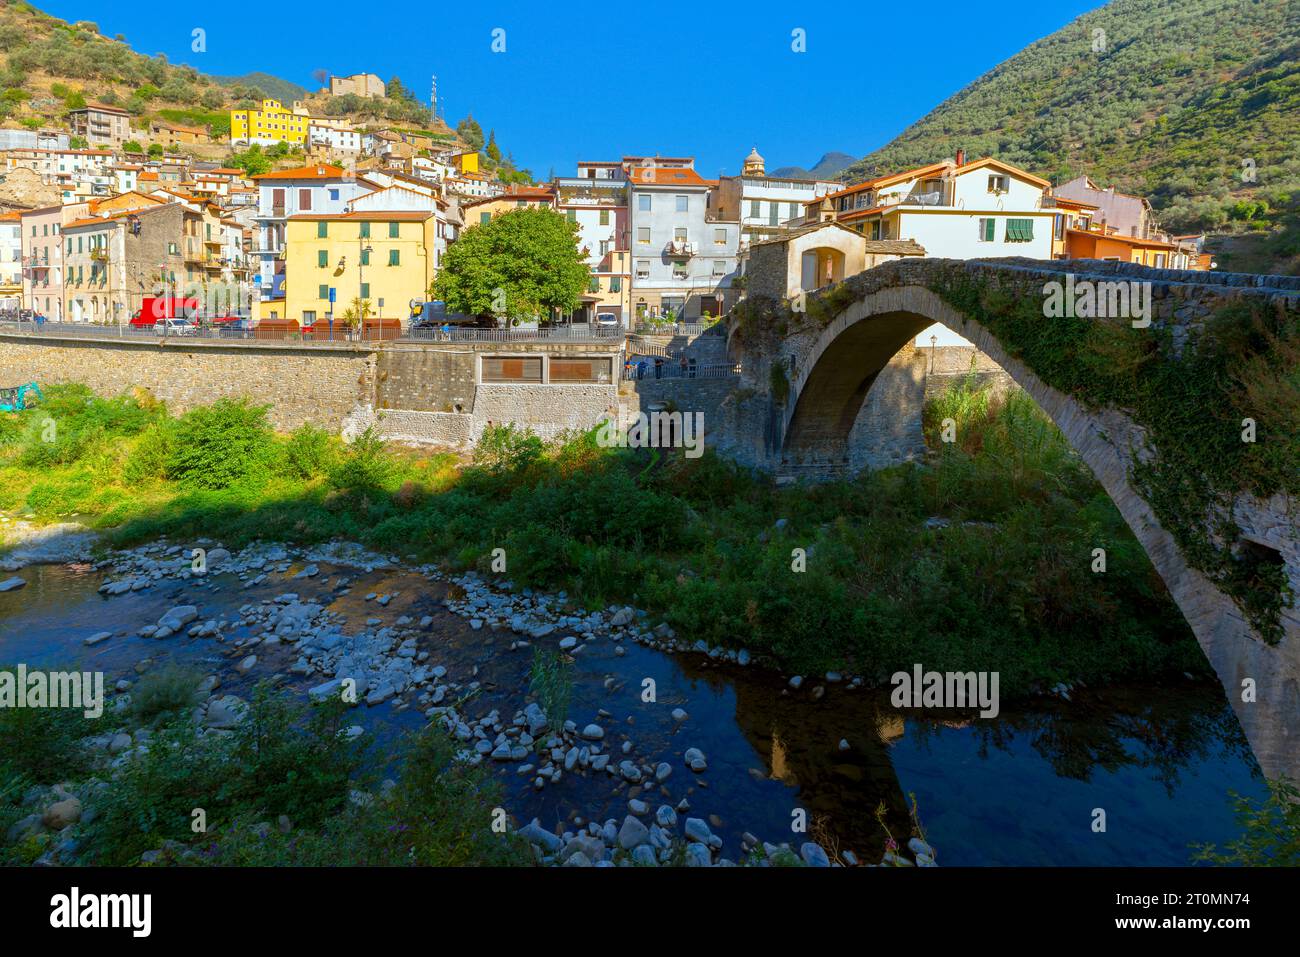 Medieval stone bridge over Argentina river and chapel in small town Badalucco. Badalucco is a comune in the Province of Imperia in Italy. Stock Photo